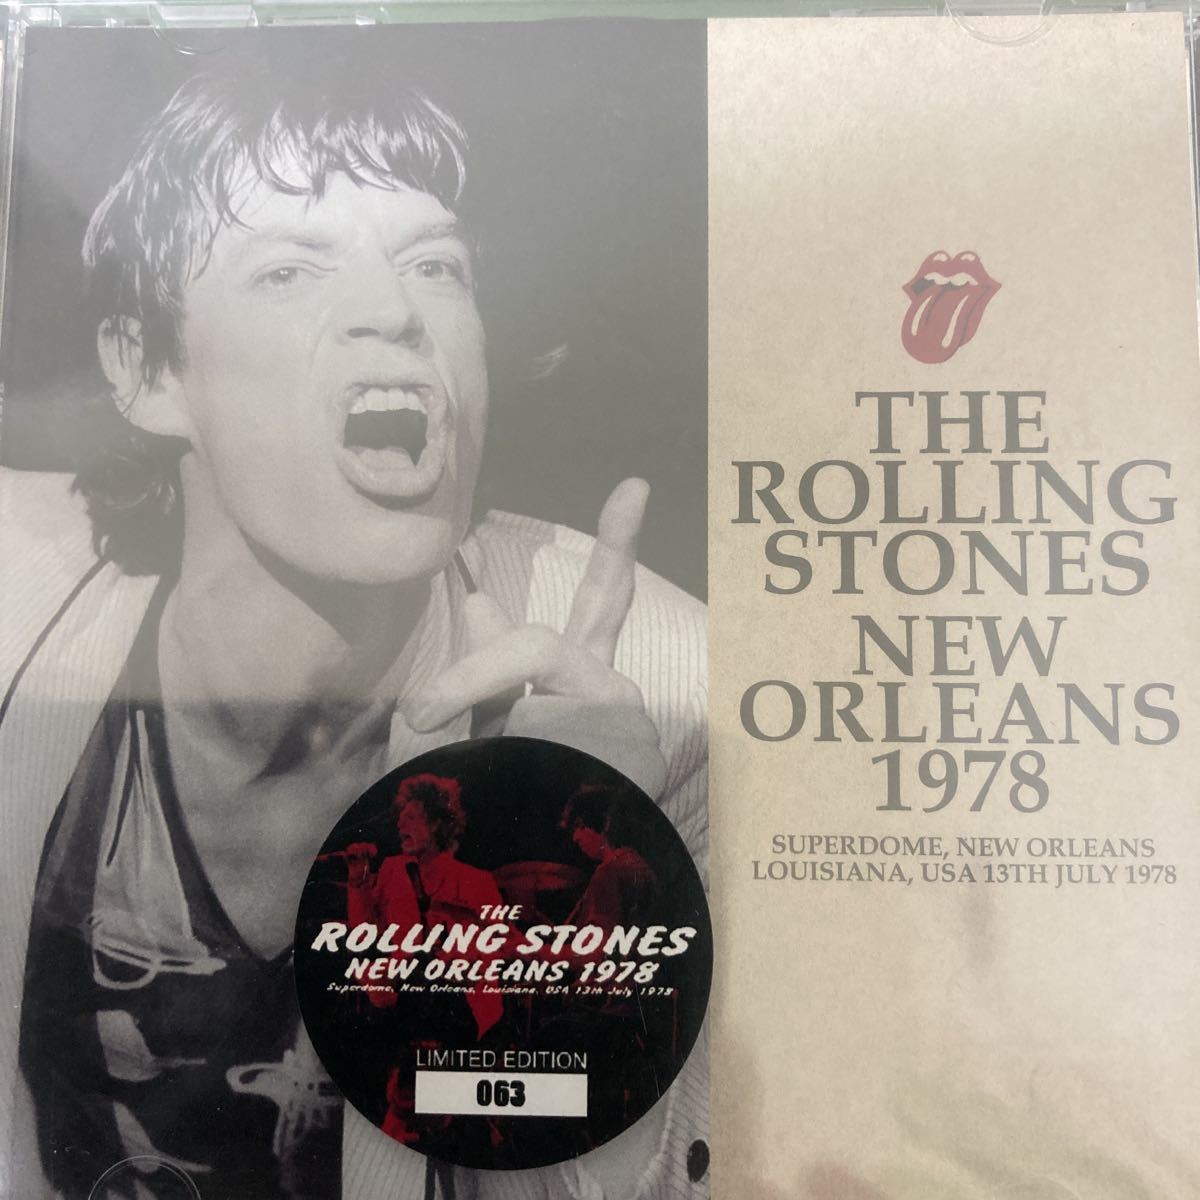 THE ROLLING STONES NEW ORLEANS 1978（ライトハウス）_画像1